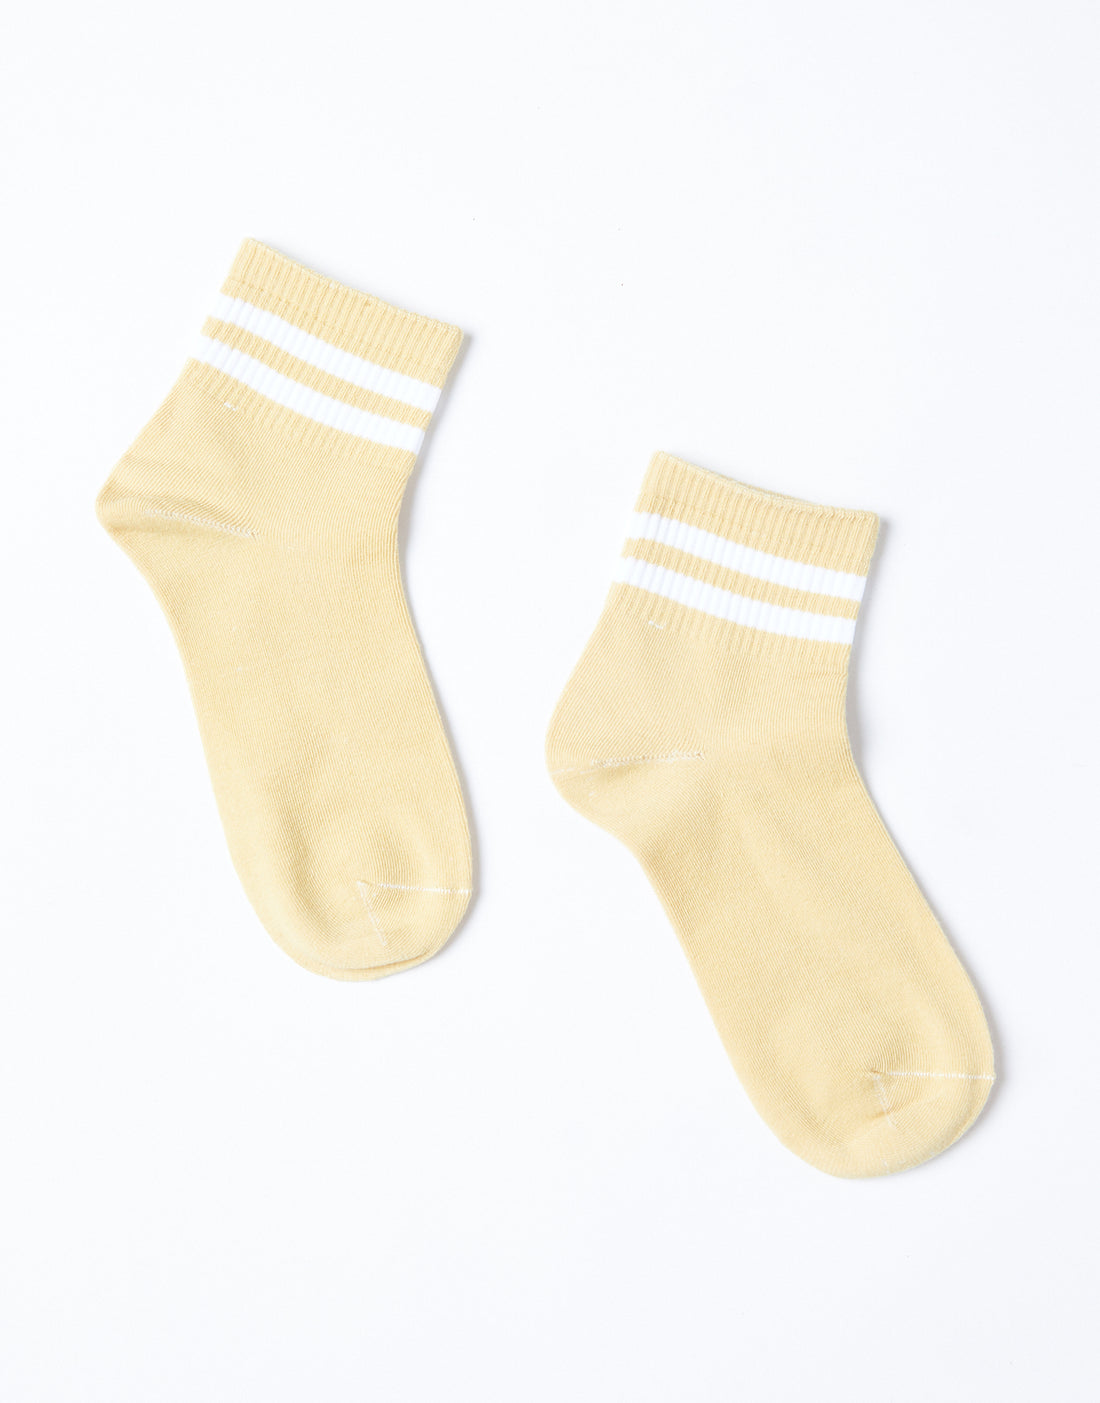 Striped Ankle Socks Accessories Mustard One Size -2020AVE